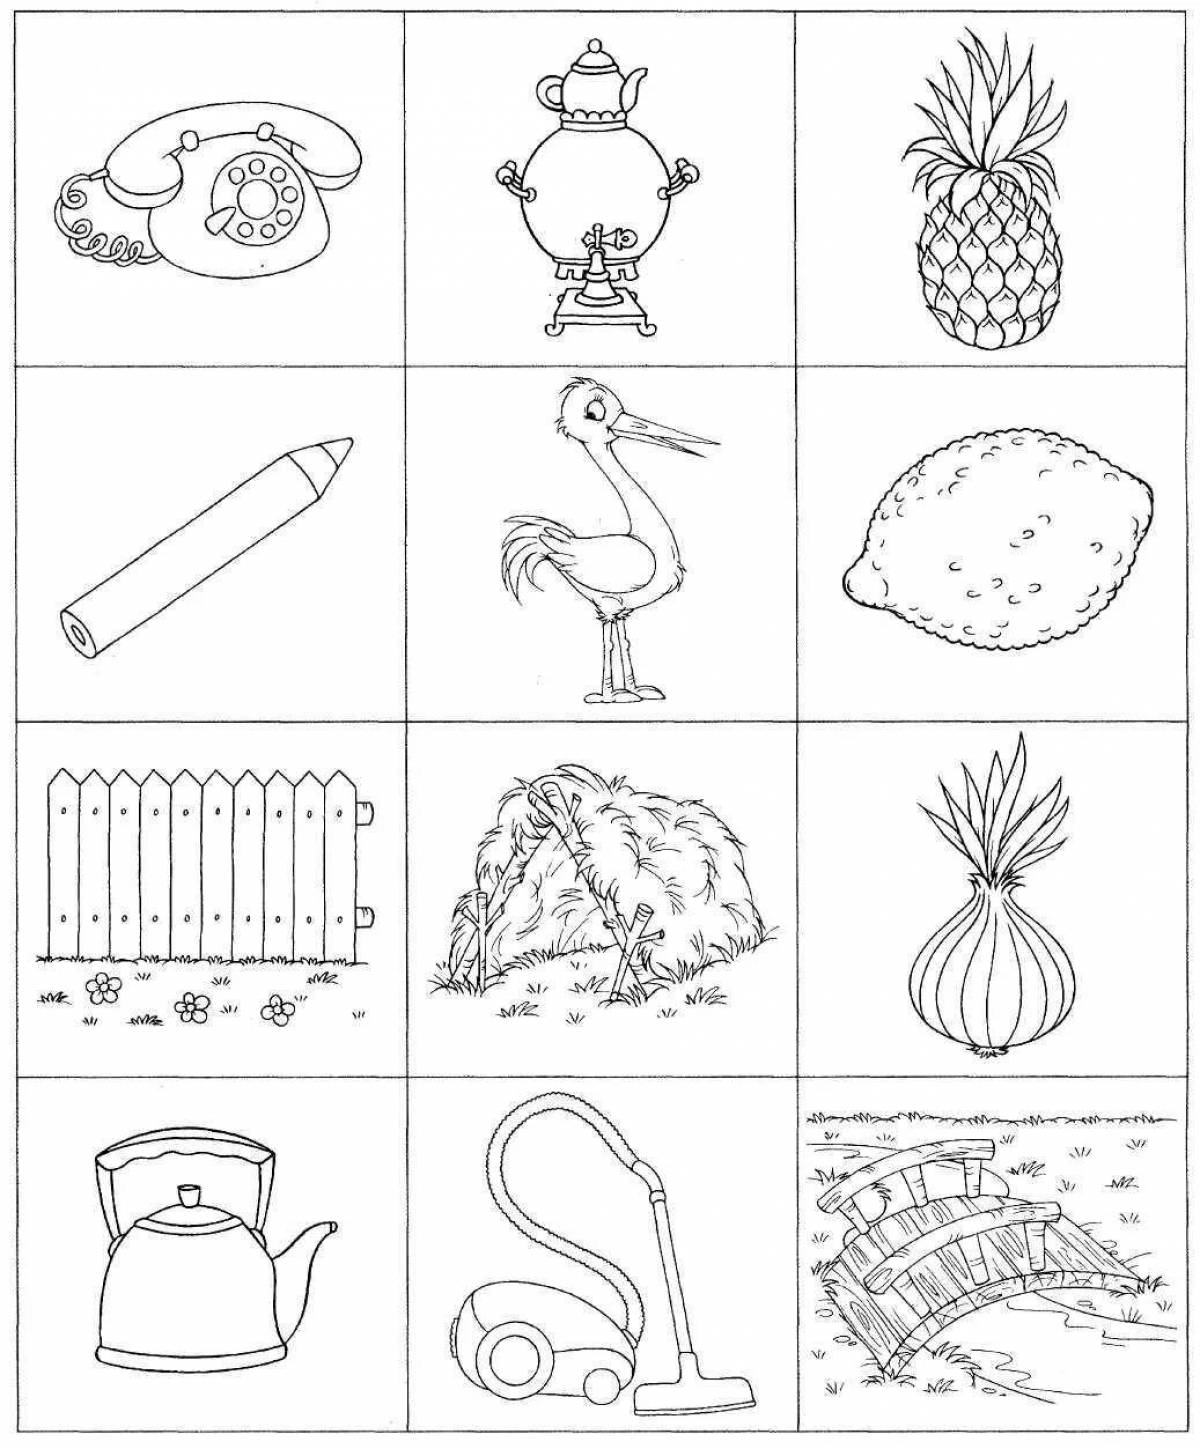 Awesome nature coloring pages for preschoolers